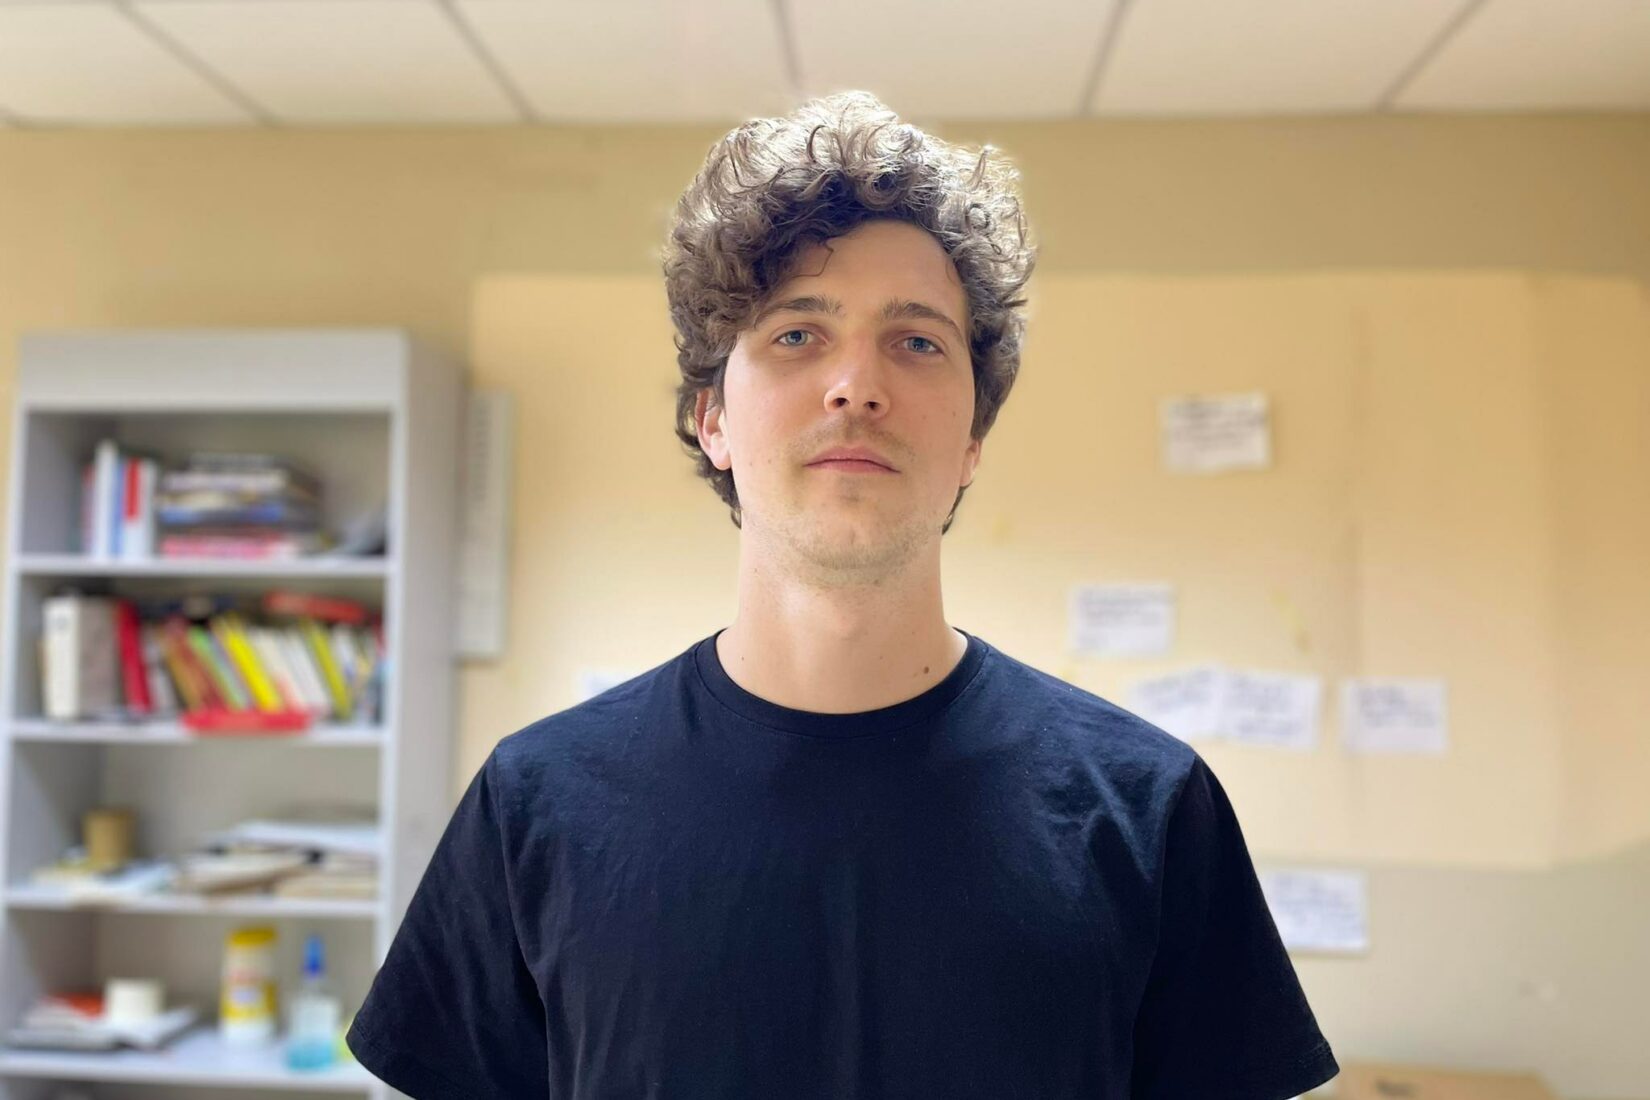 Portrait of a young man standing in classroom. Wears a black t-shirt.